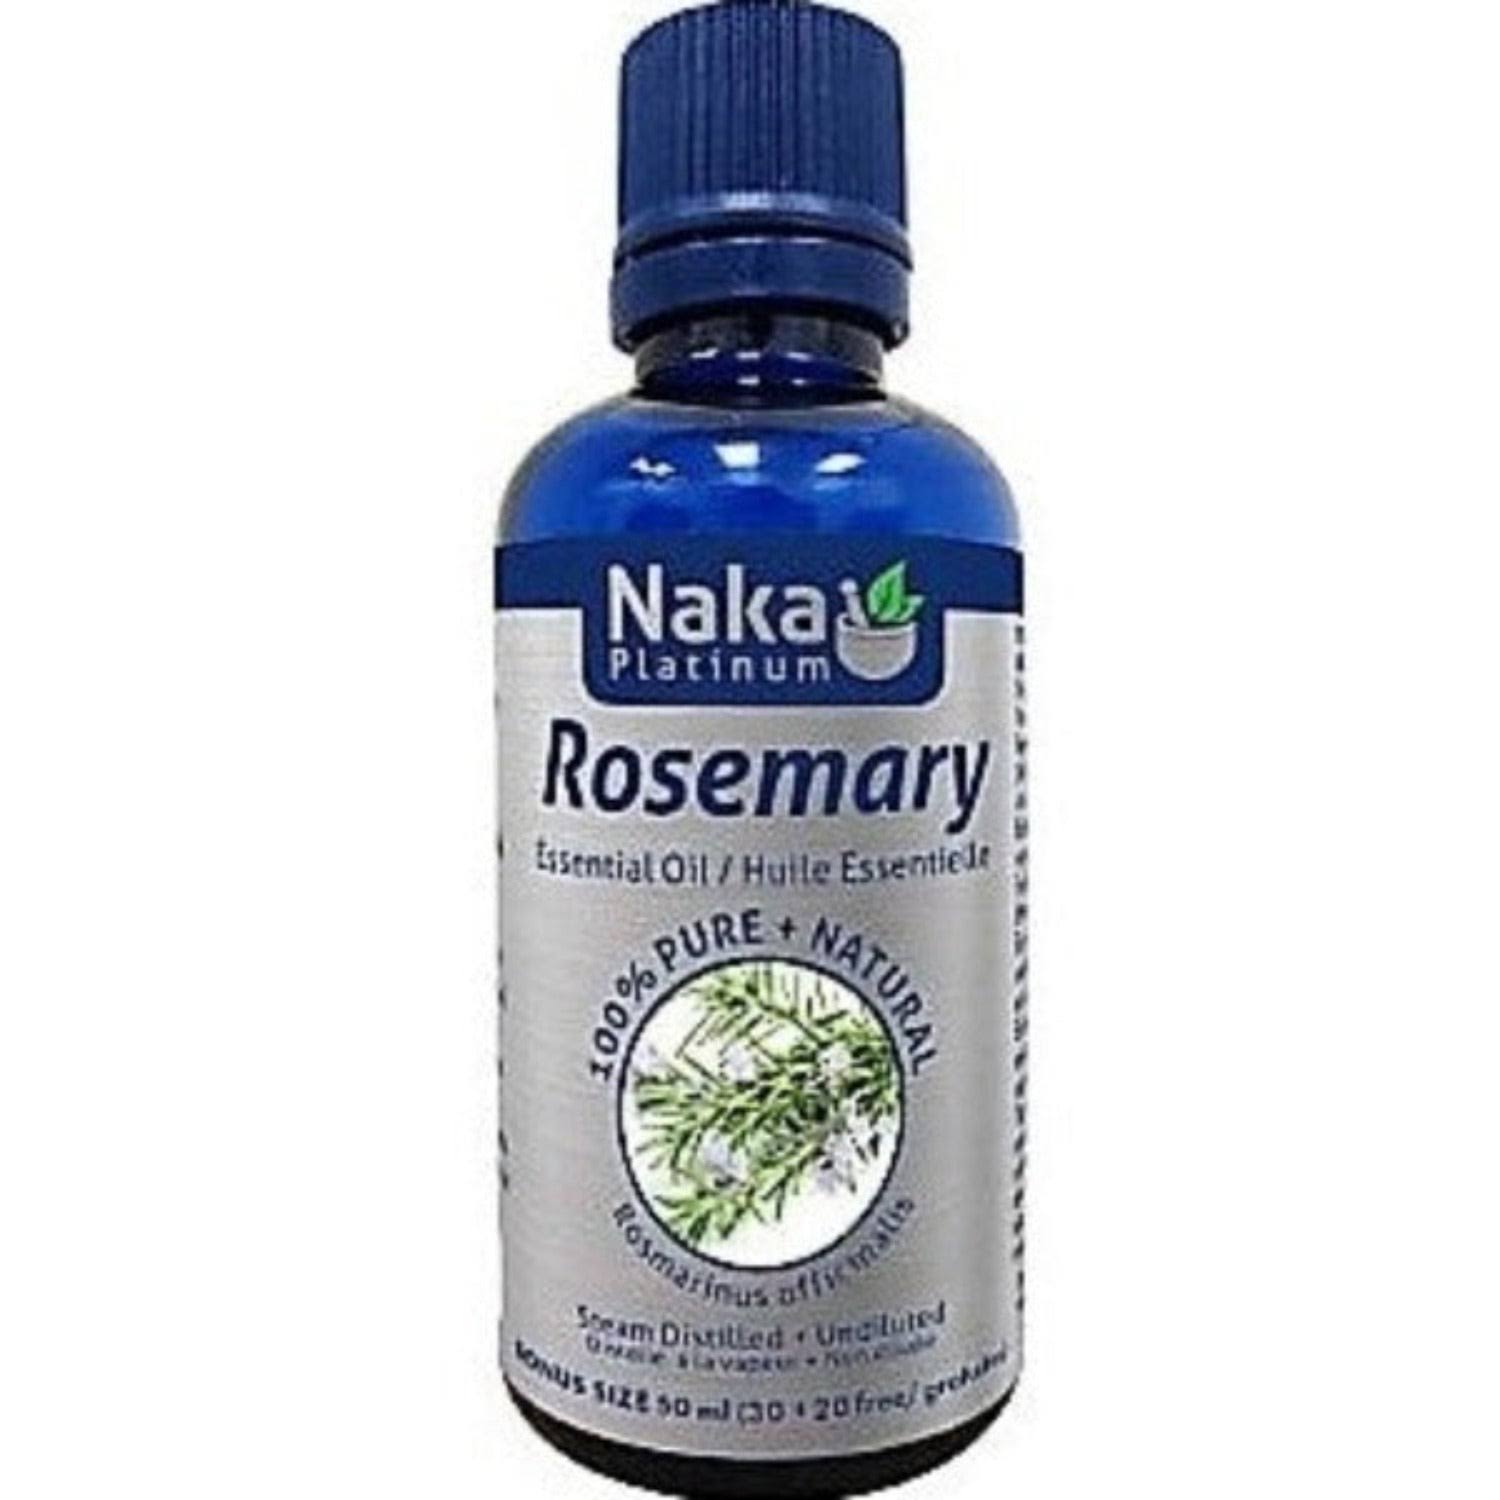 100% Pure Rosemary Essential Oil - 50ml